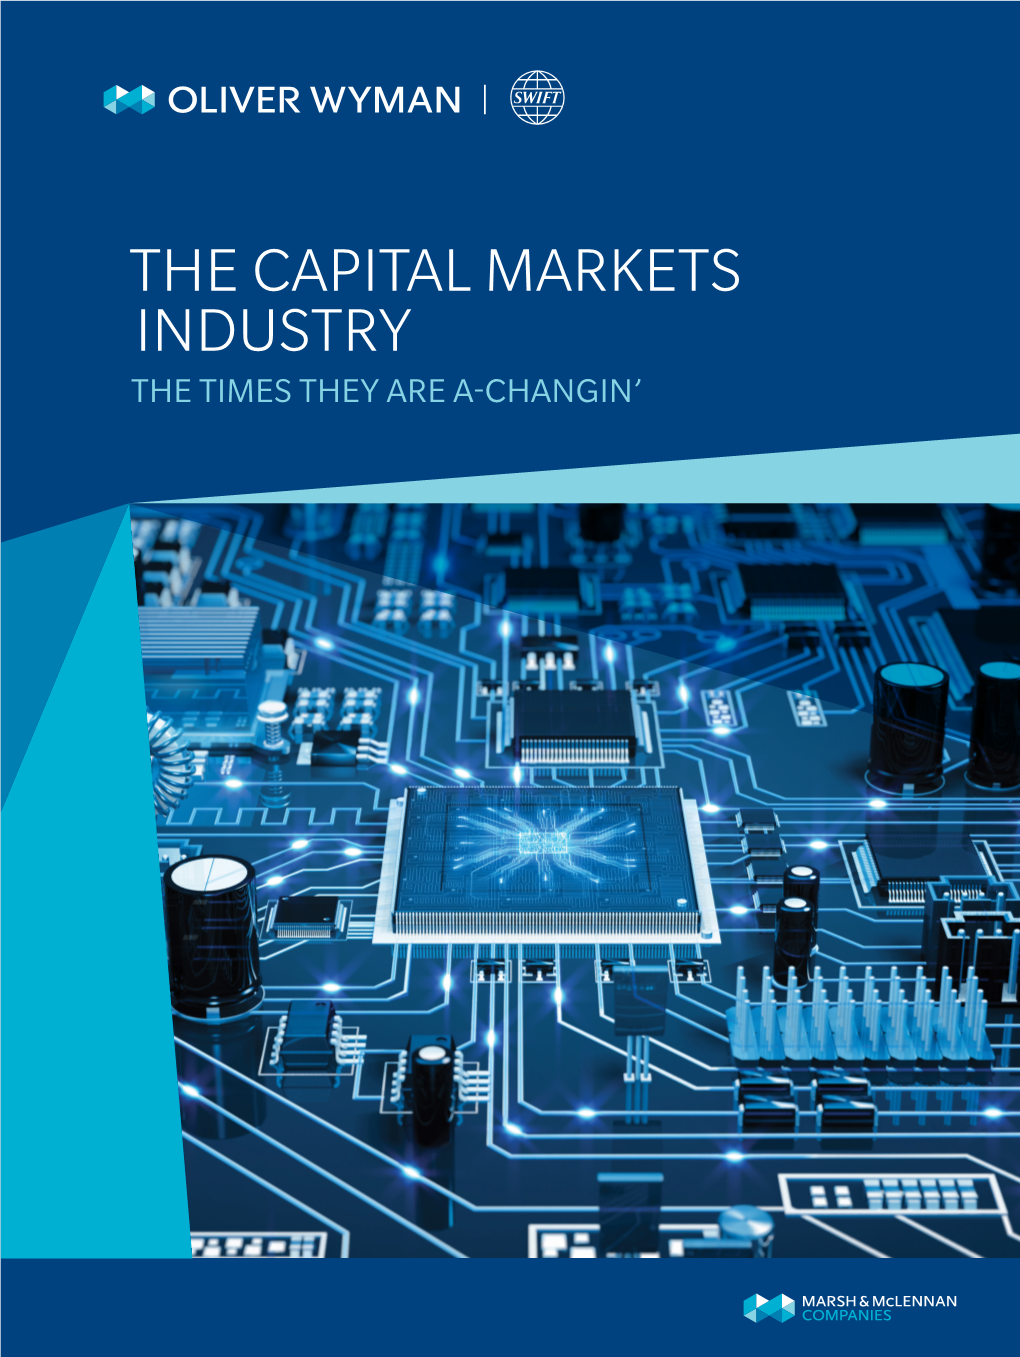 The Capital Markets Industry the Times They Are A-Changin’